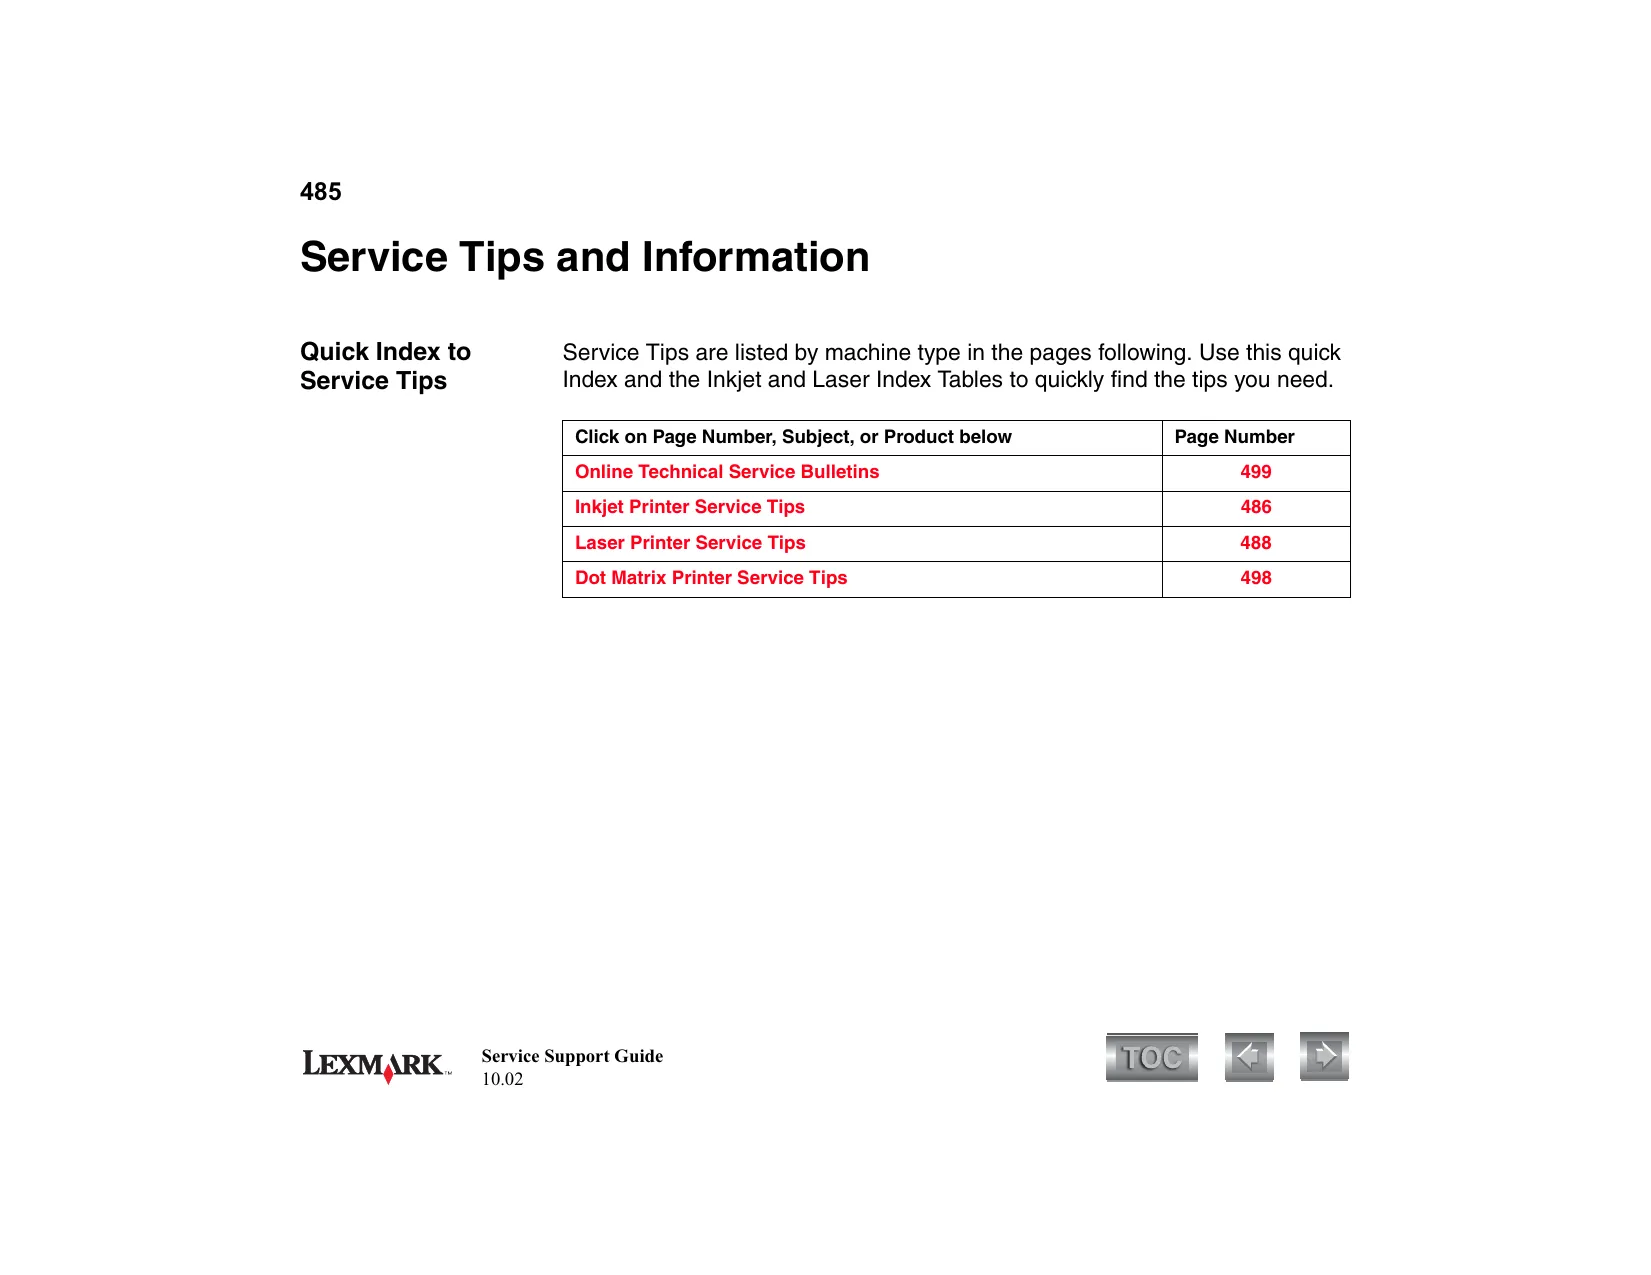 Lexmark C770, C772, C780, C782 series service guide Preview image 1